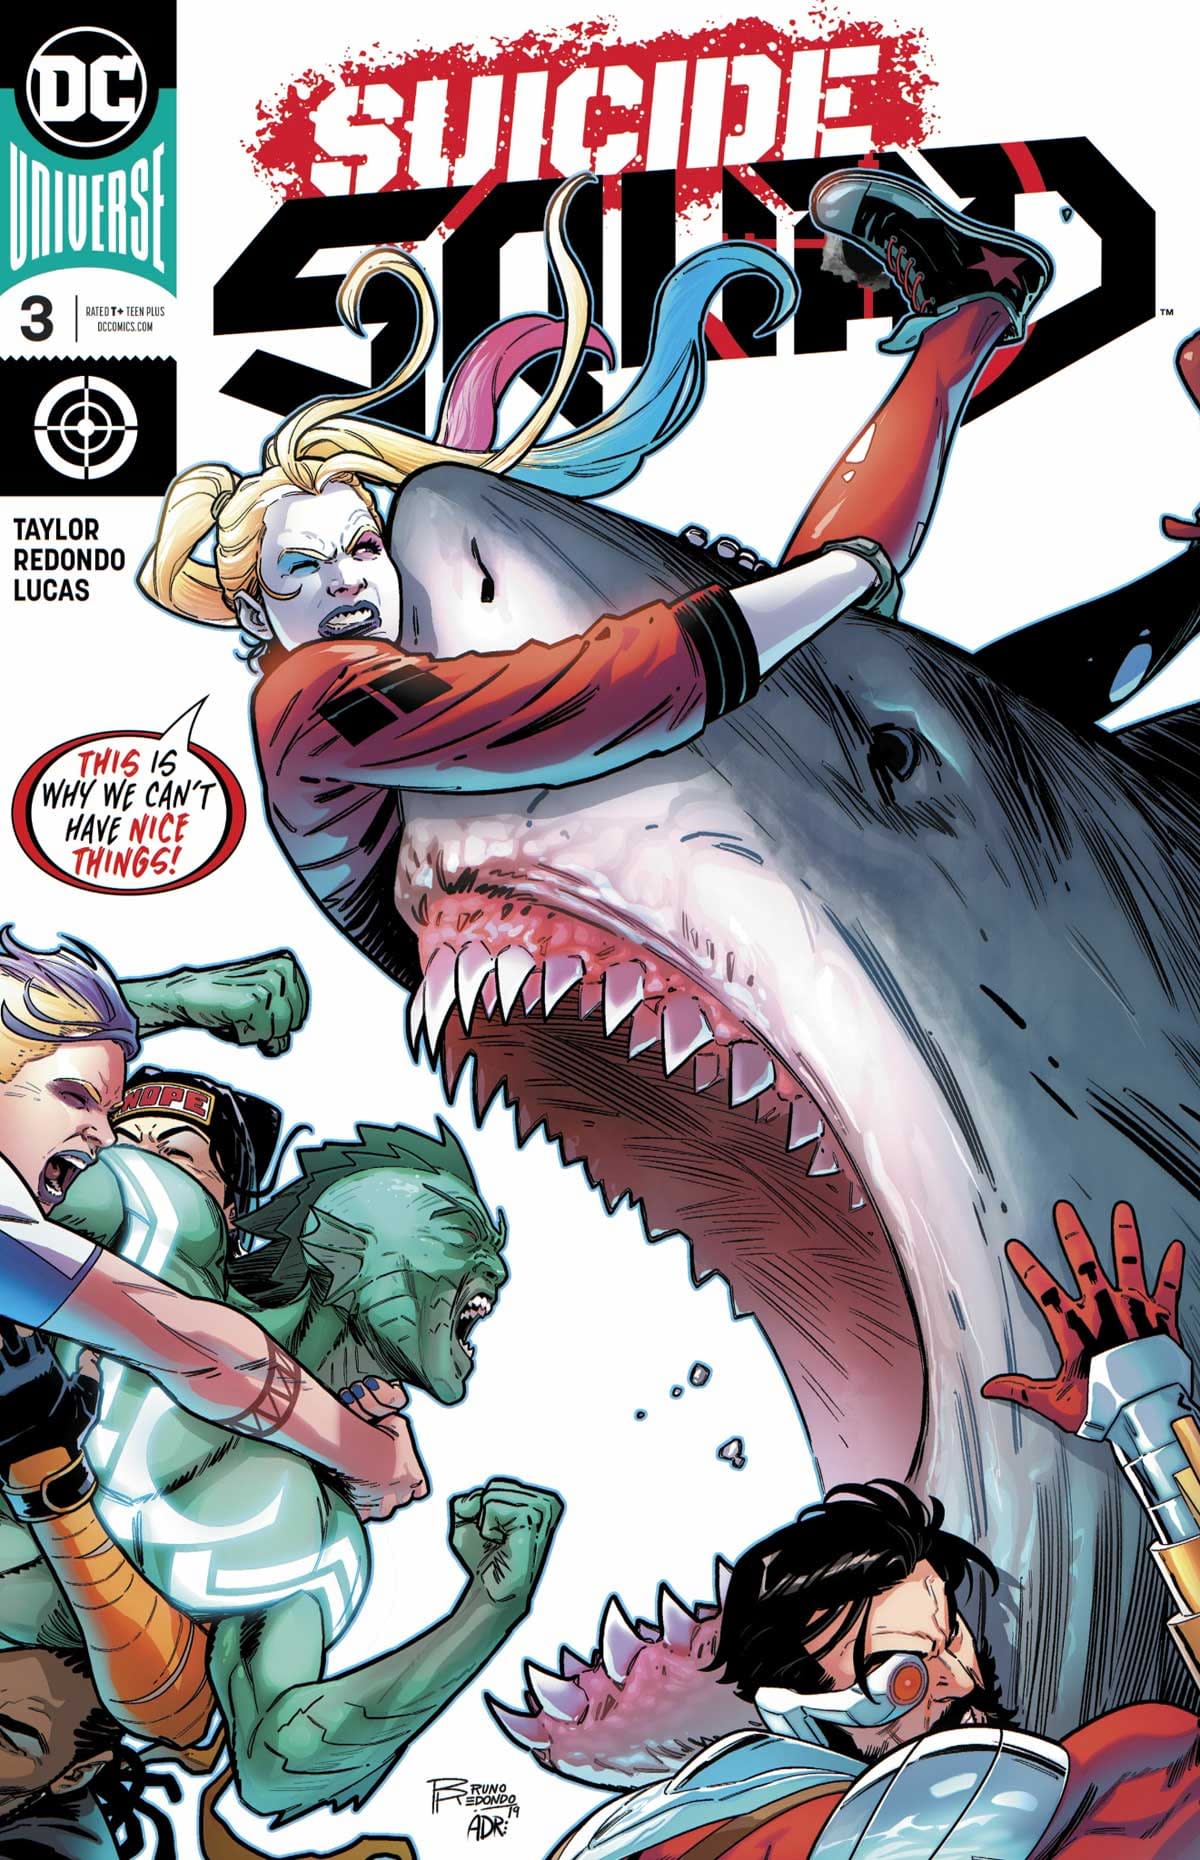 REVIEW: Suicide Squad #3 -- "This Issue Is Very Enjoyable"